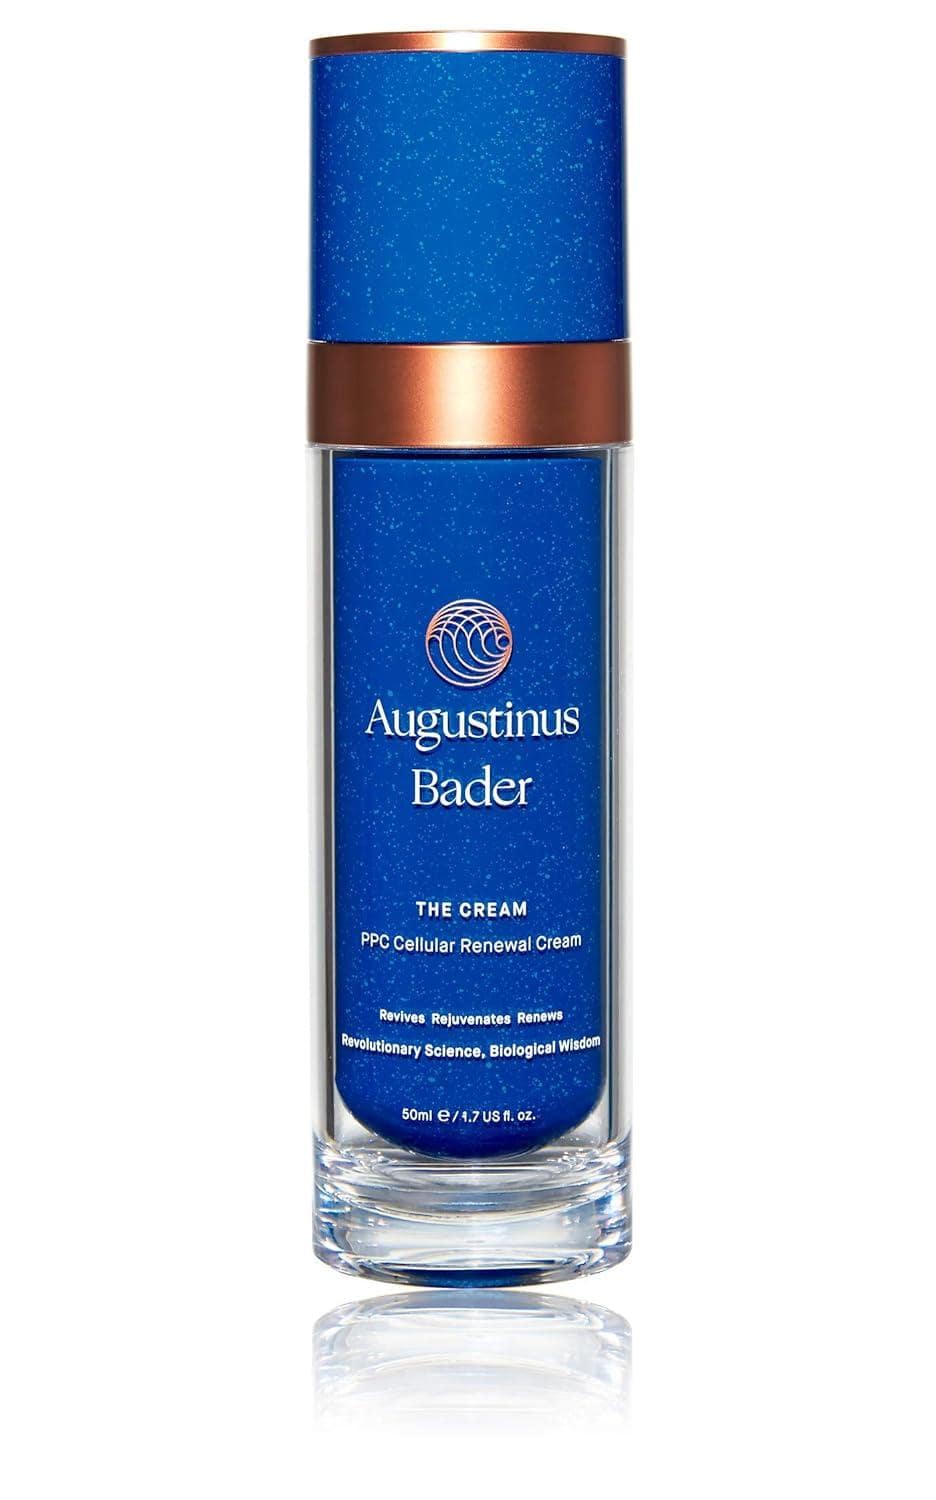 Augustinus Bader's The Rich Cream-Your Go-To Moisturizer for Mature Skin, Delivering Hydration and Radiance, Even in Harsh Winter Conditions.